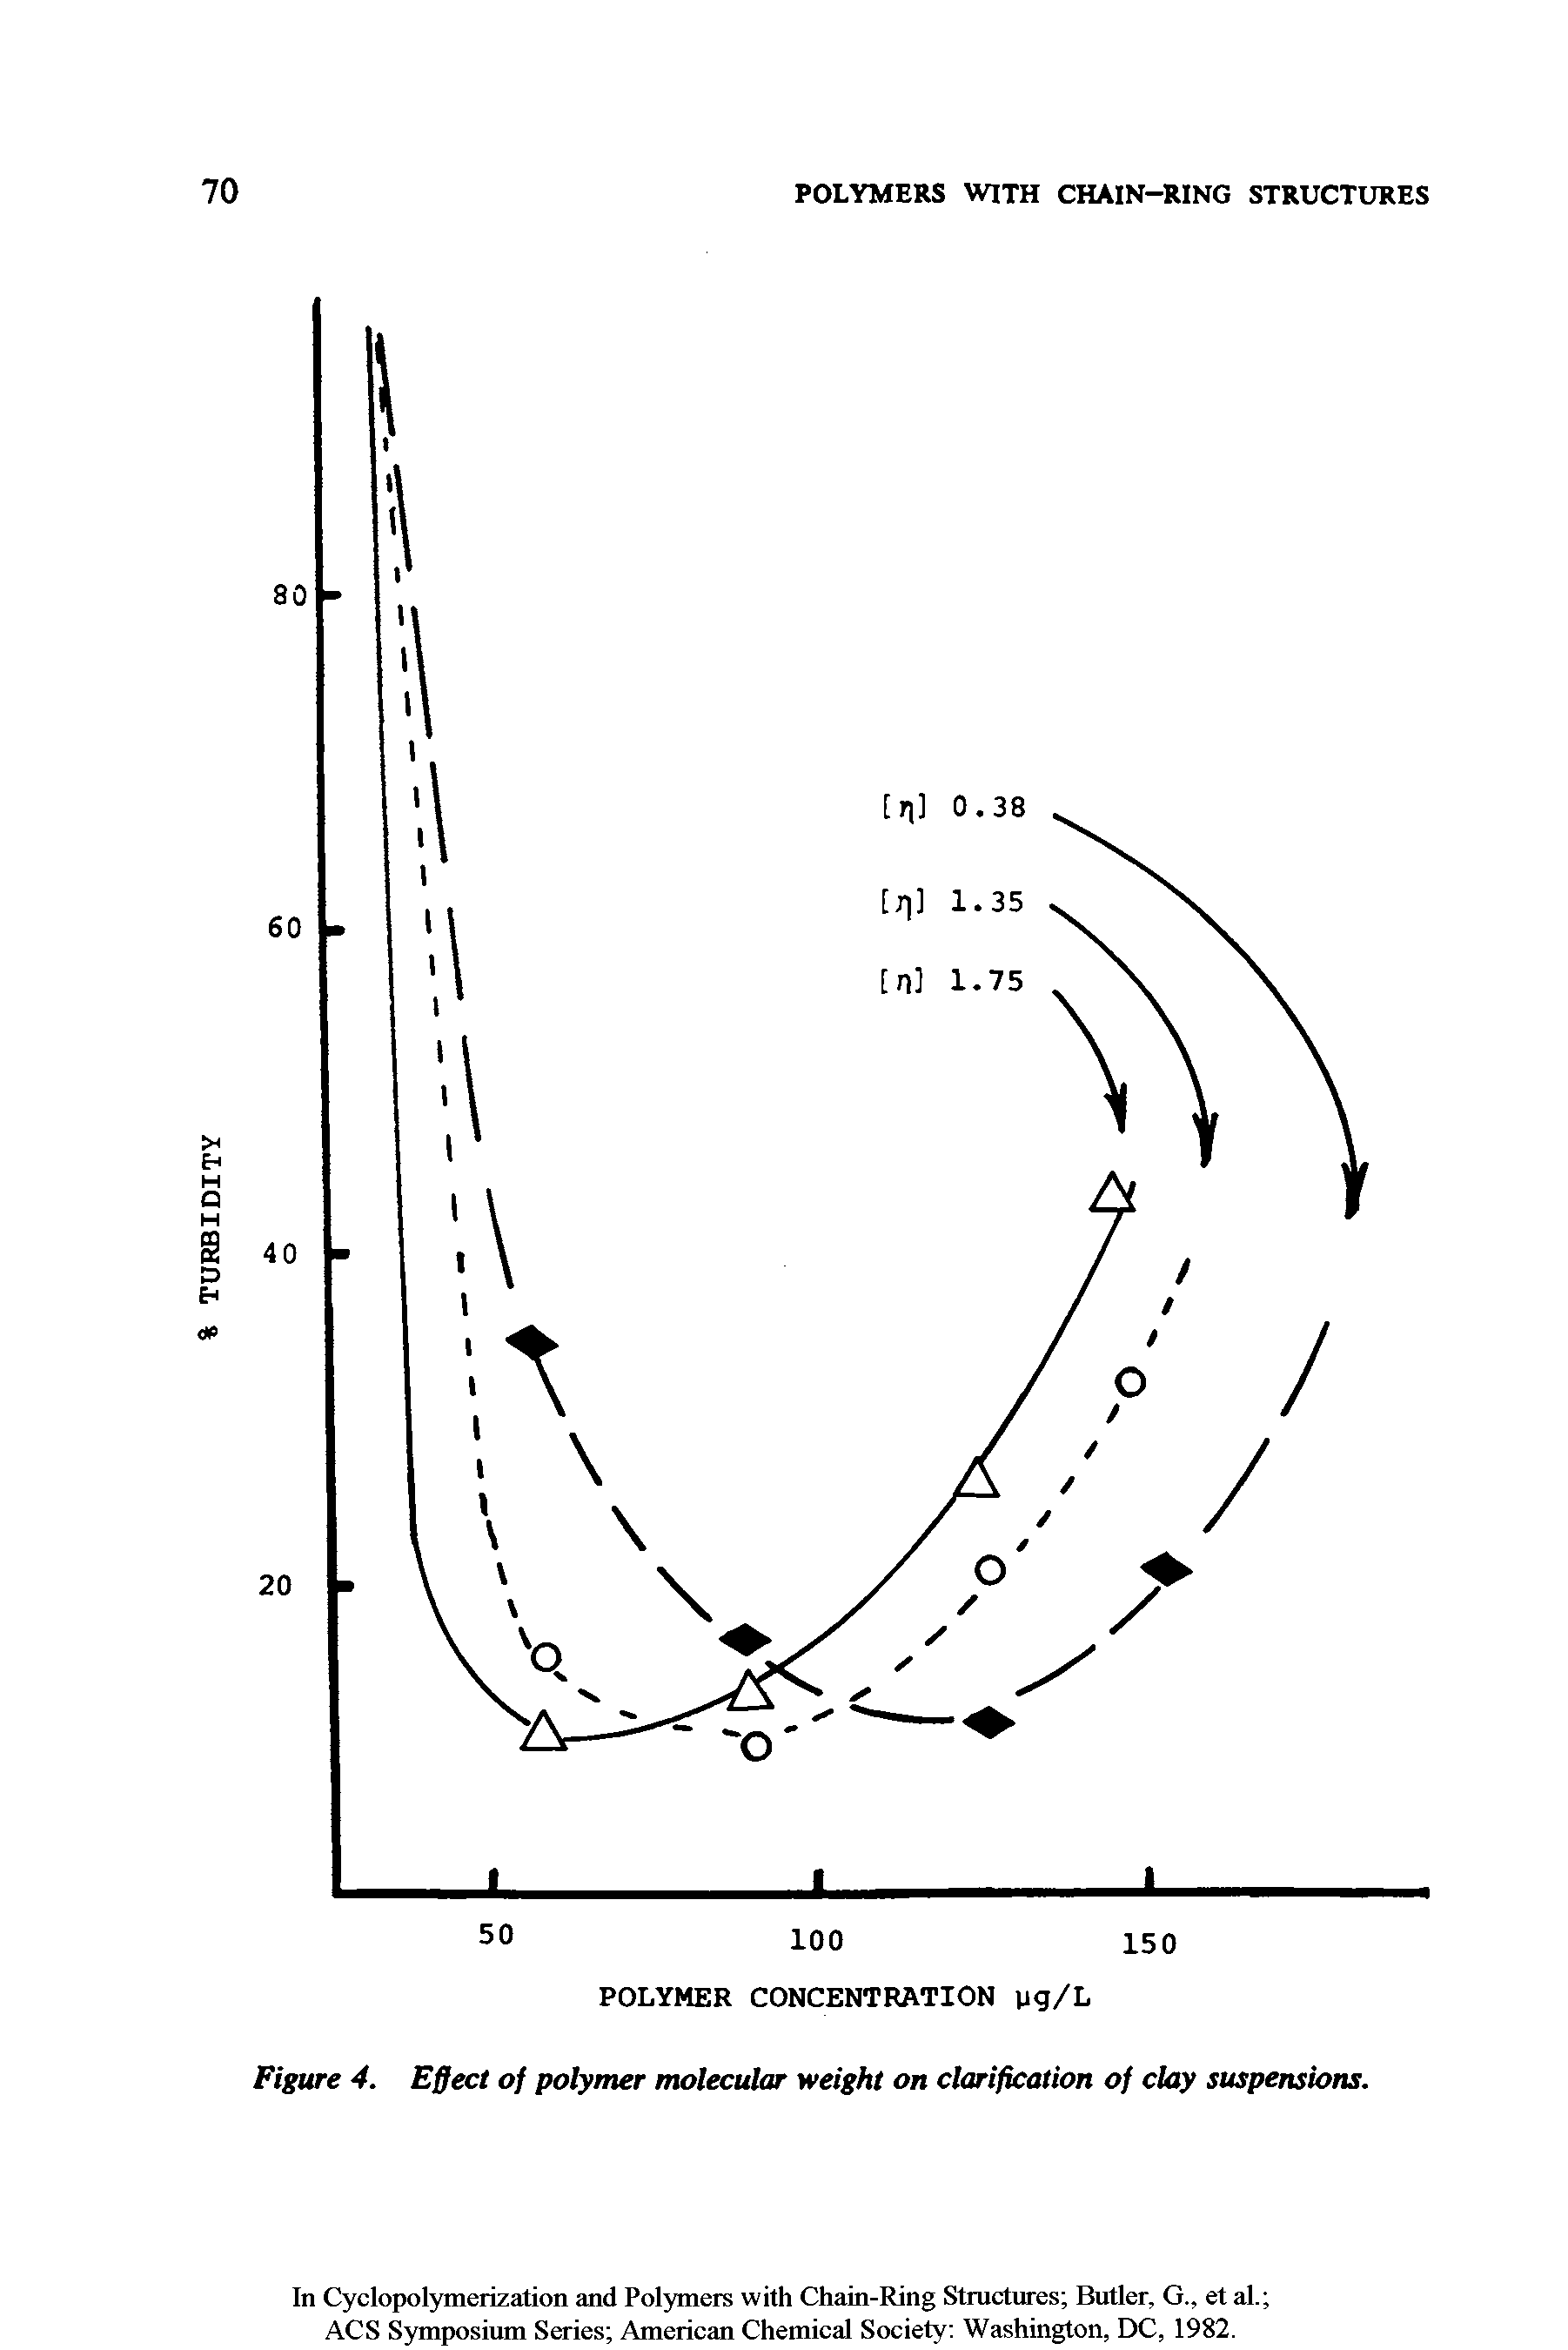 Figure 4. Effect of polymer molecular weight on clarification of clay suspensions.